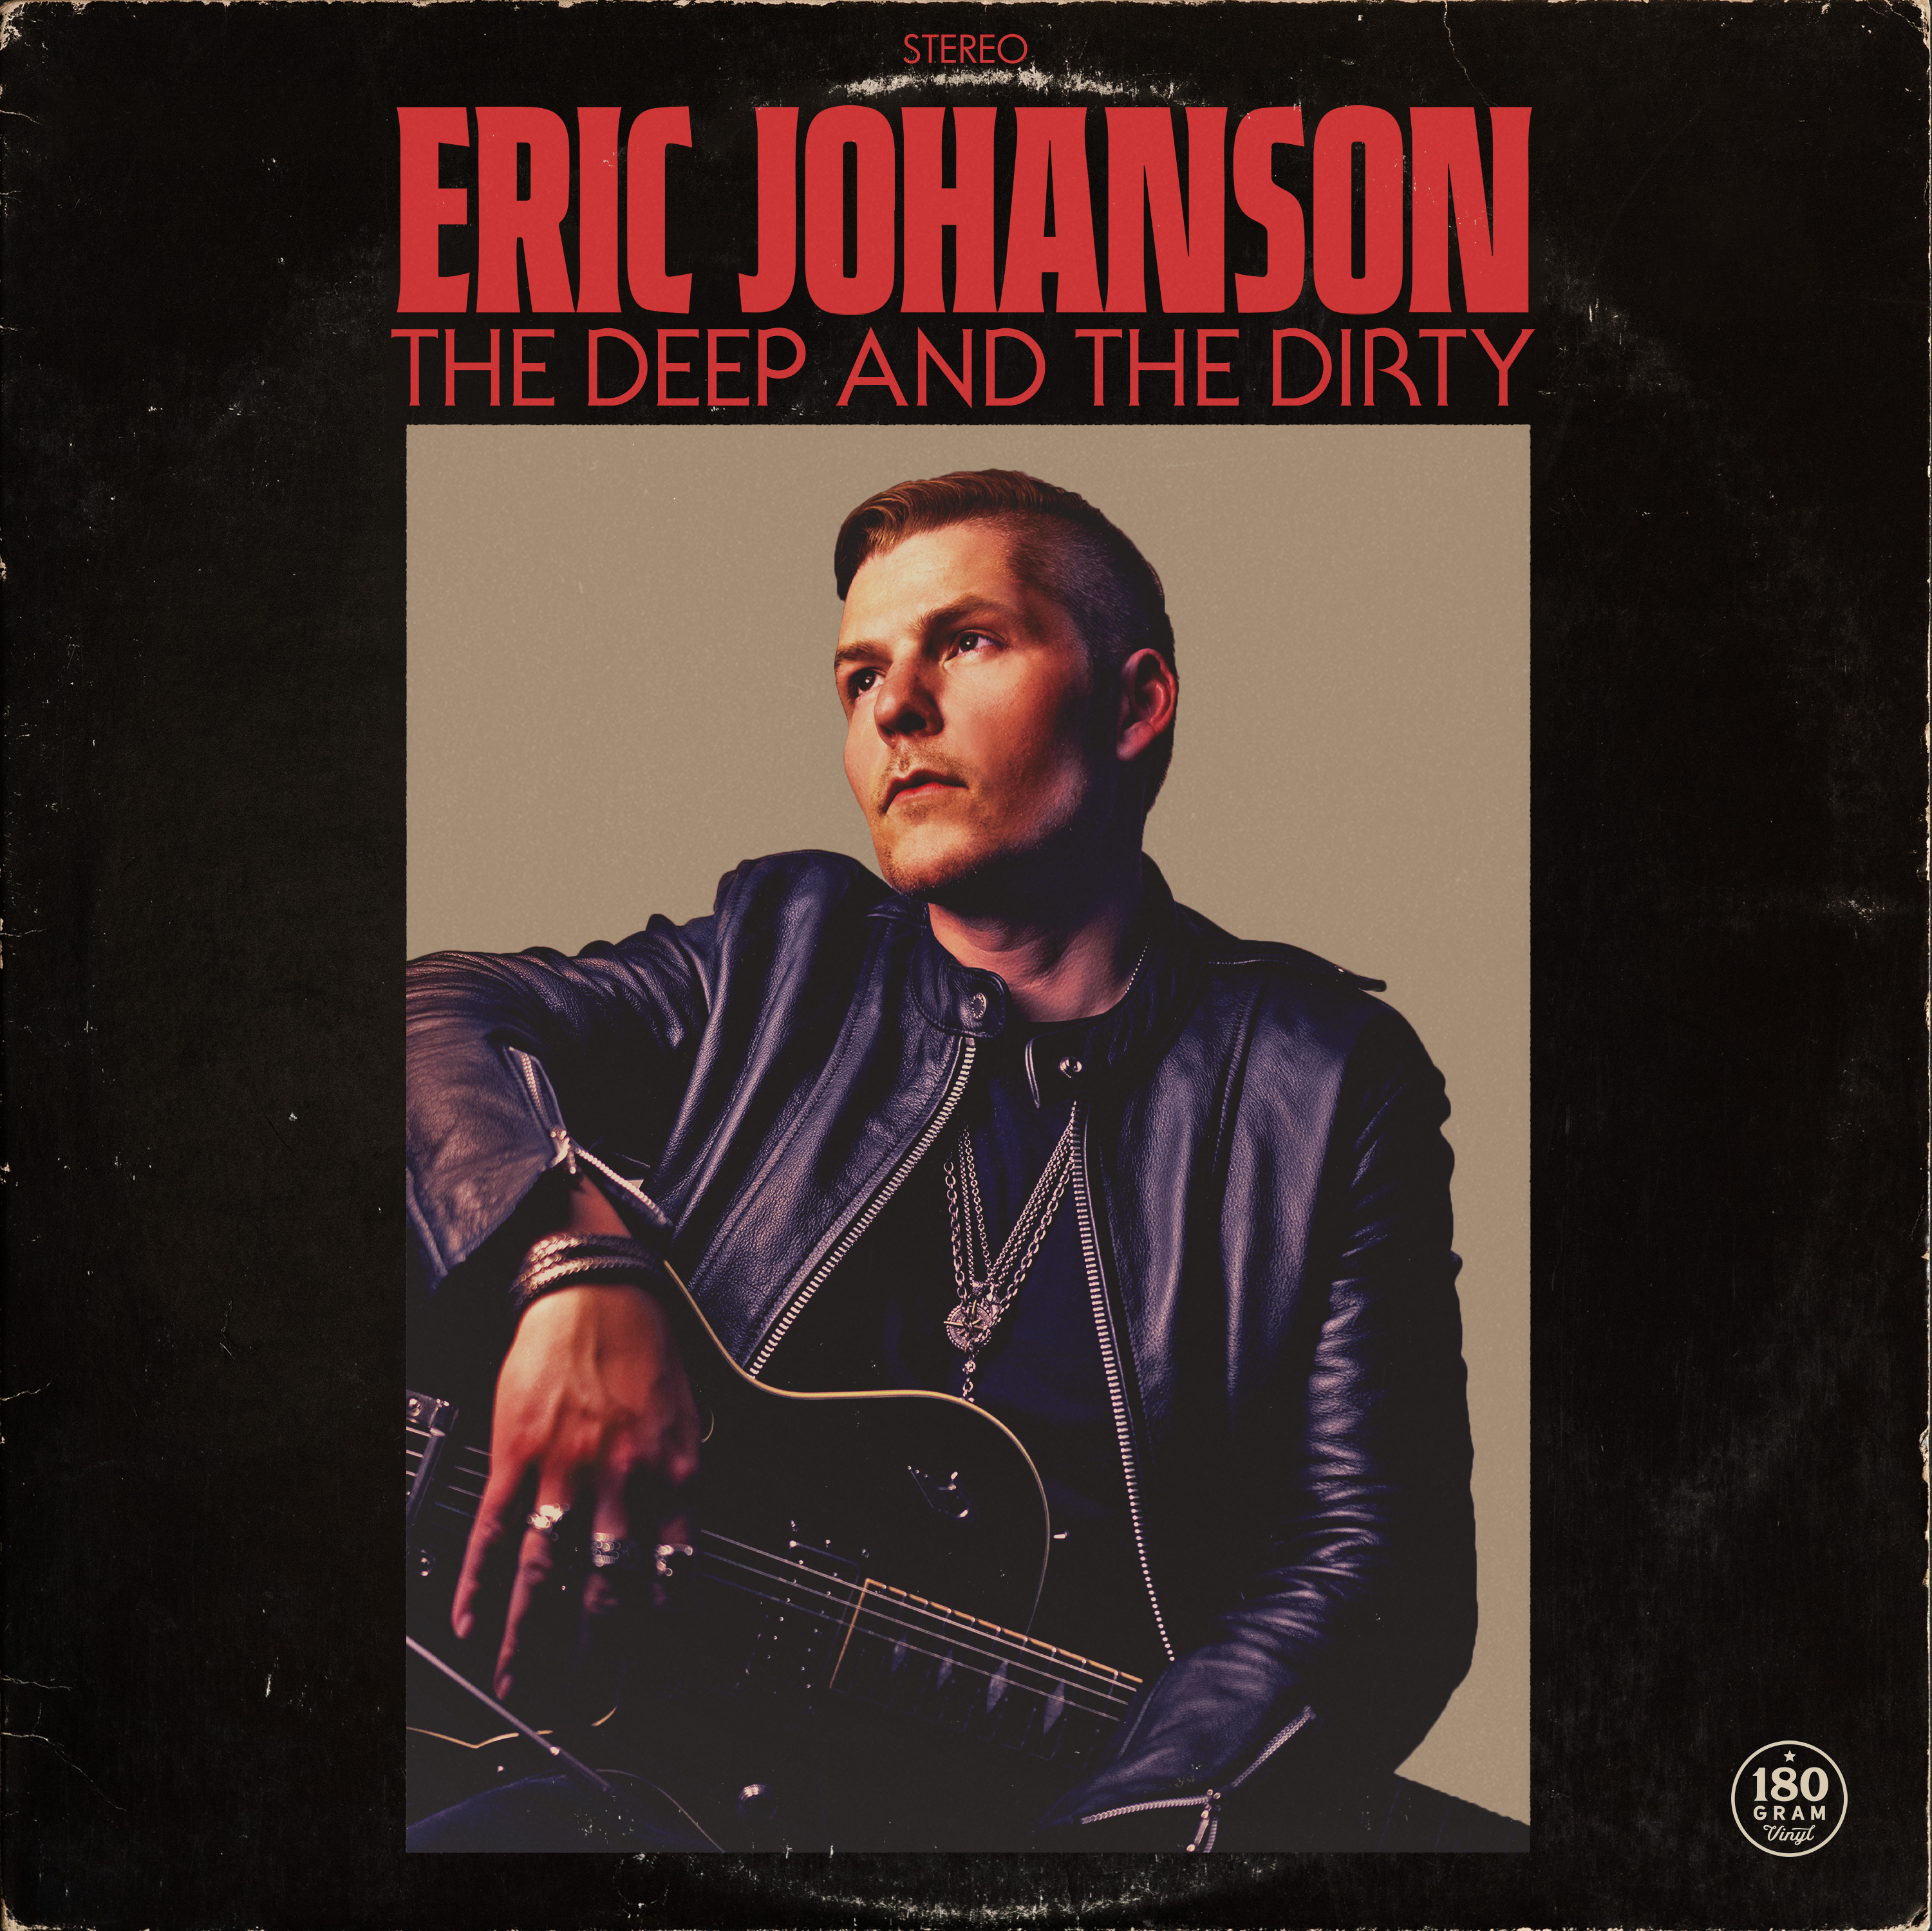 The Deep And The Dirty - Autographed 180g Vinyl LP + Digital Album